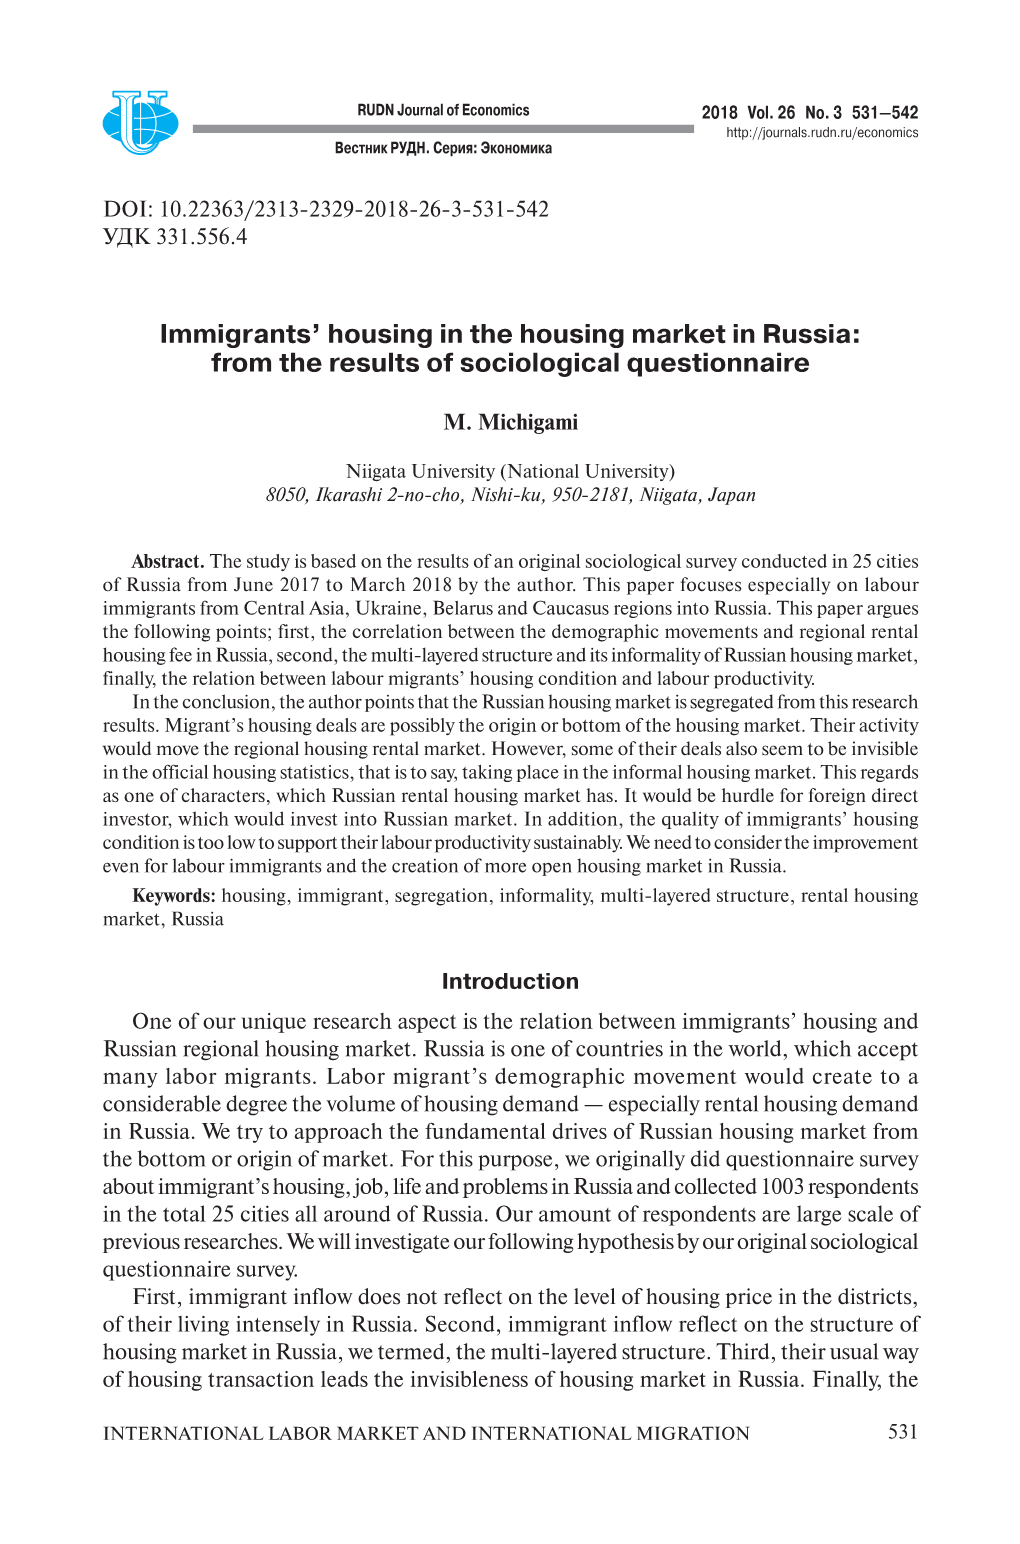 Immigrants' Housing in the Housing Market in Russia: from the Results Of